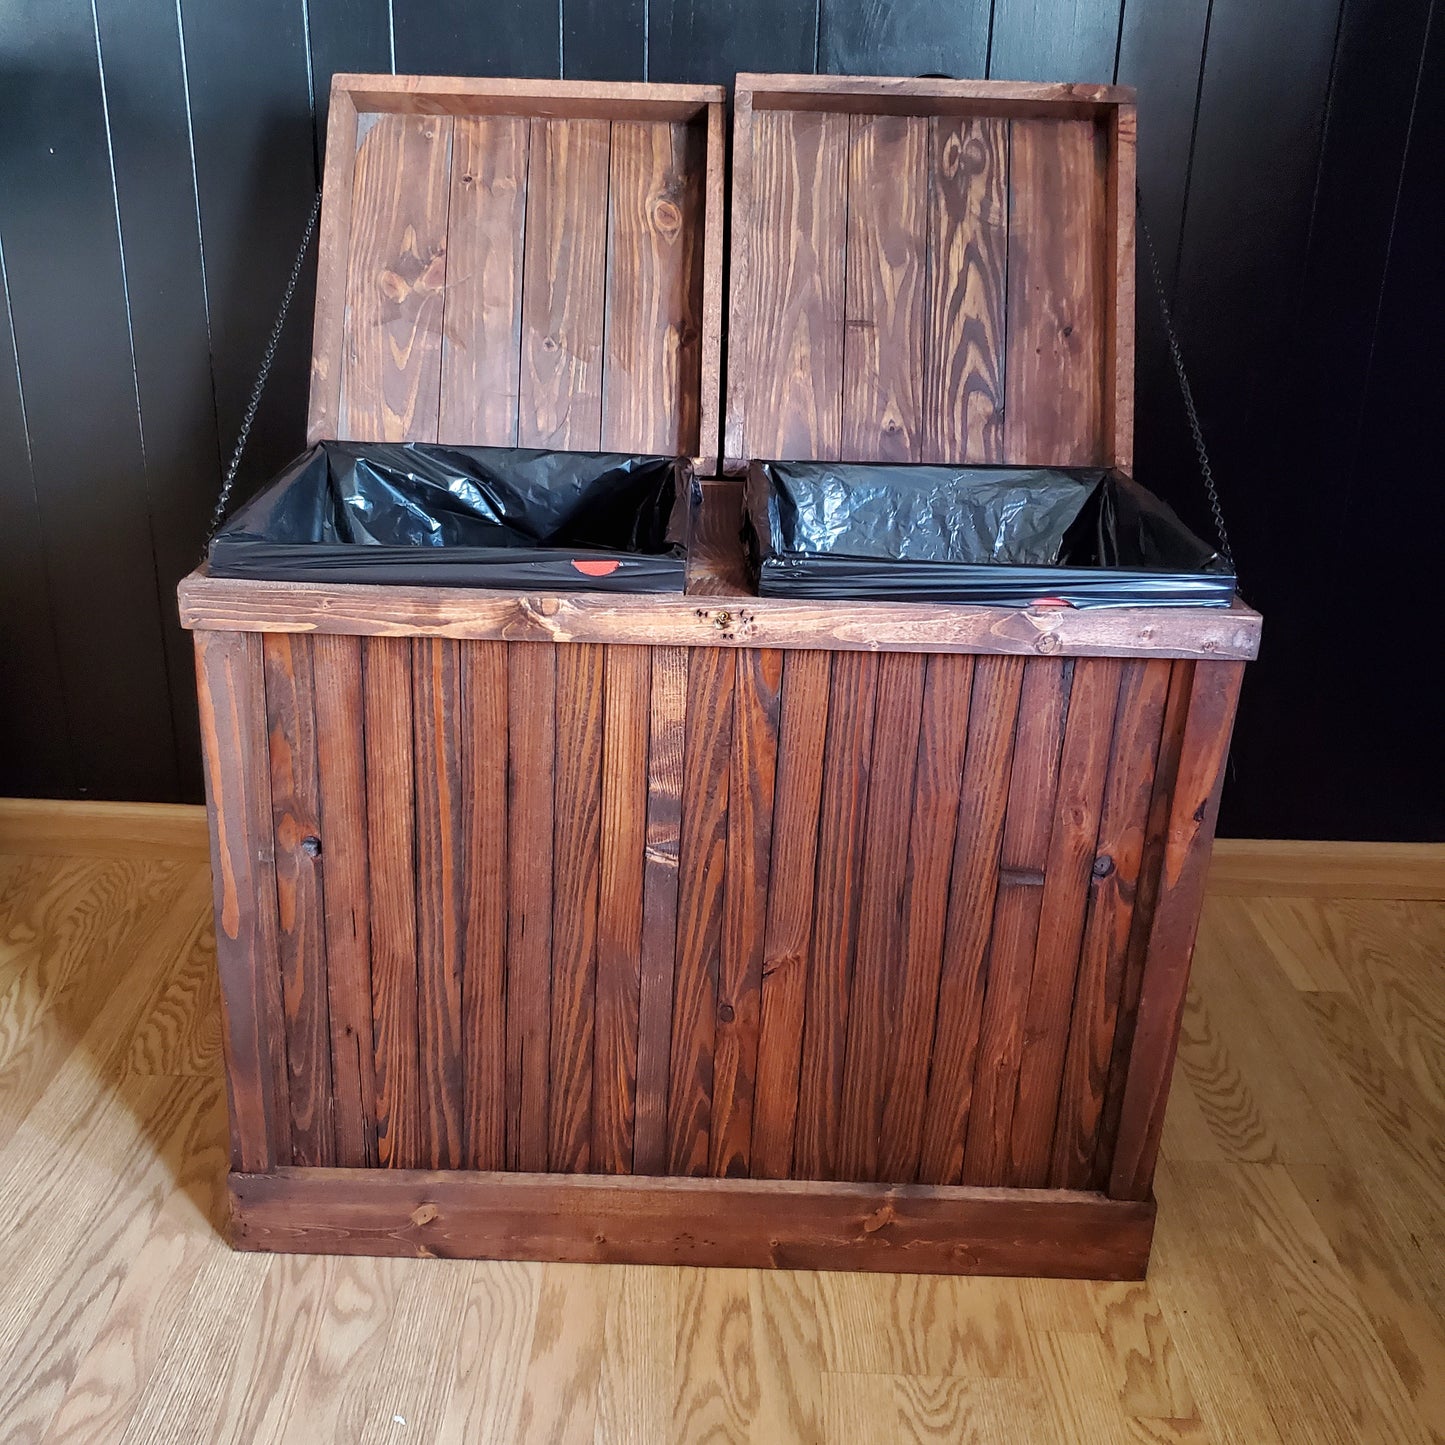 Rustic Two Sided Wood Trash Can